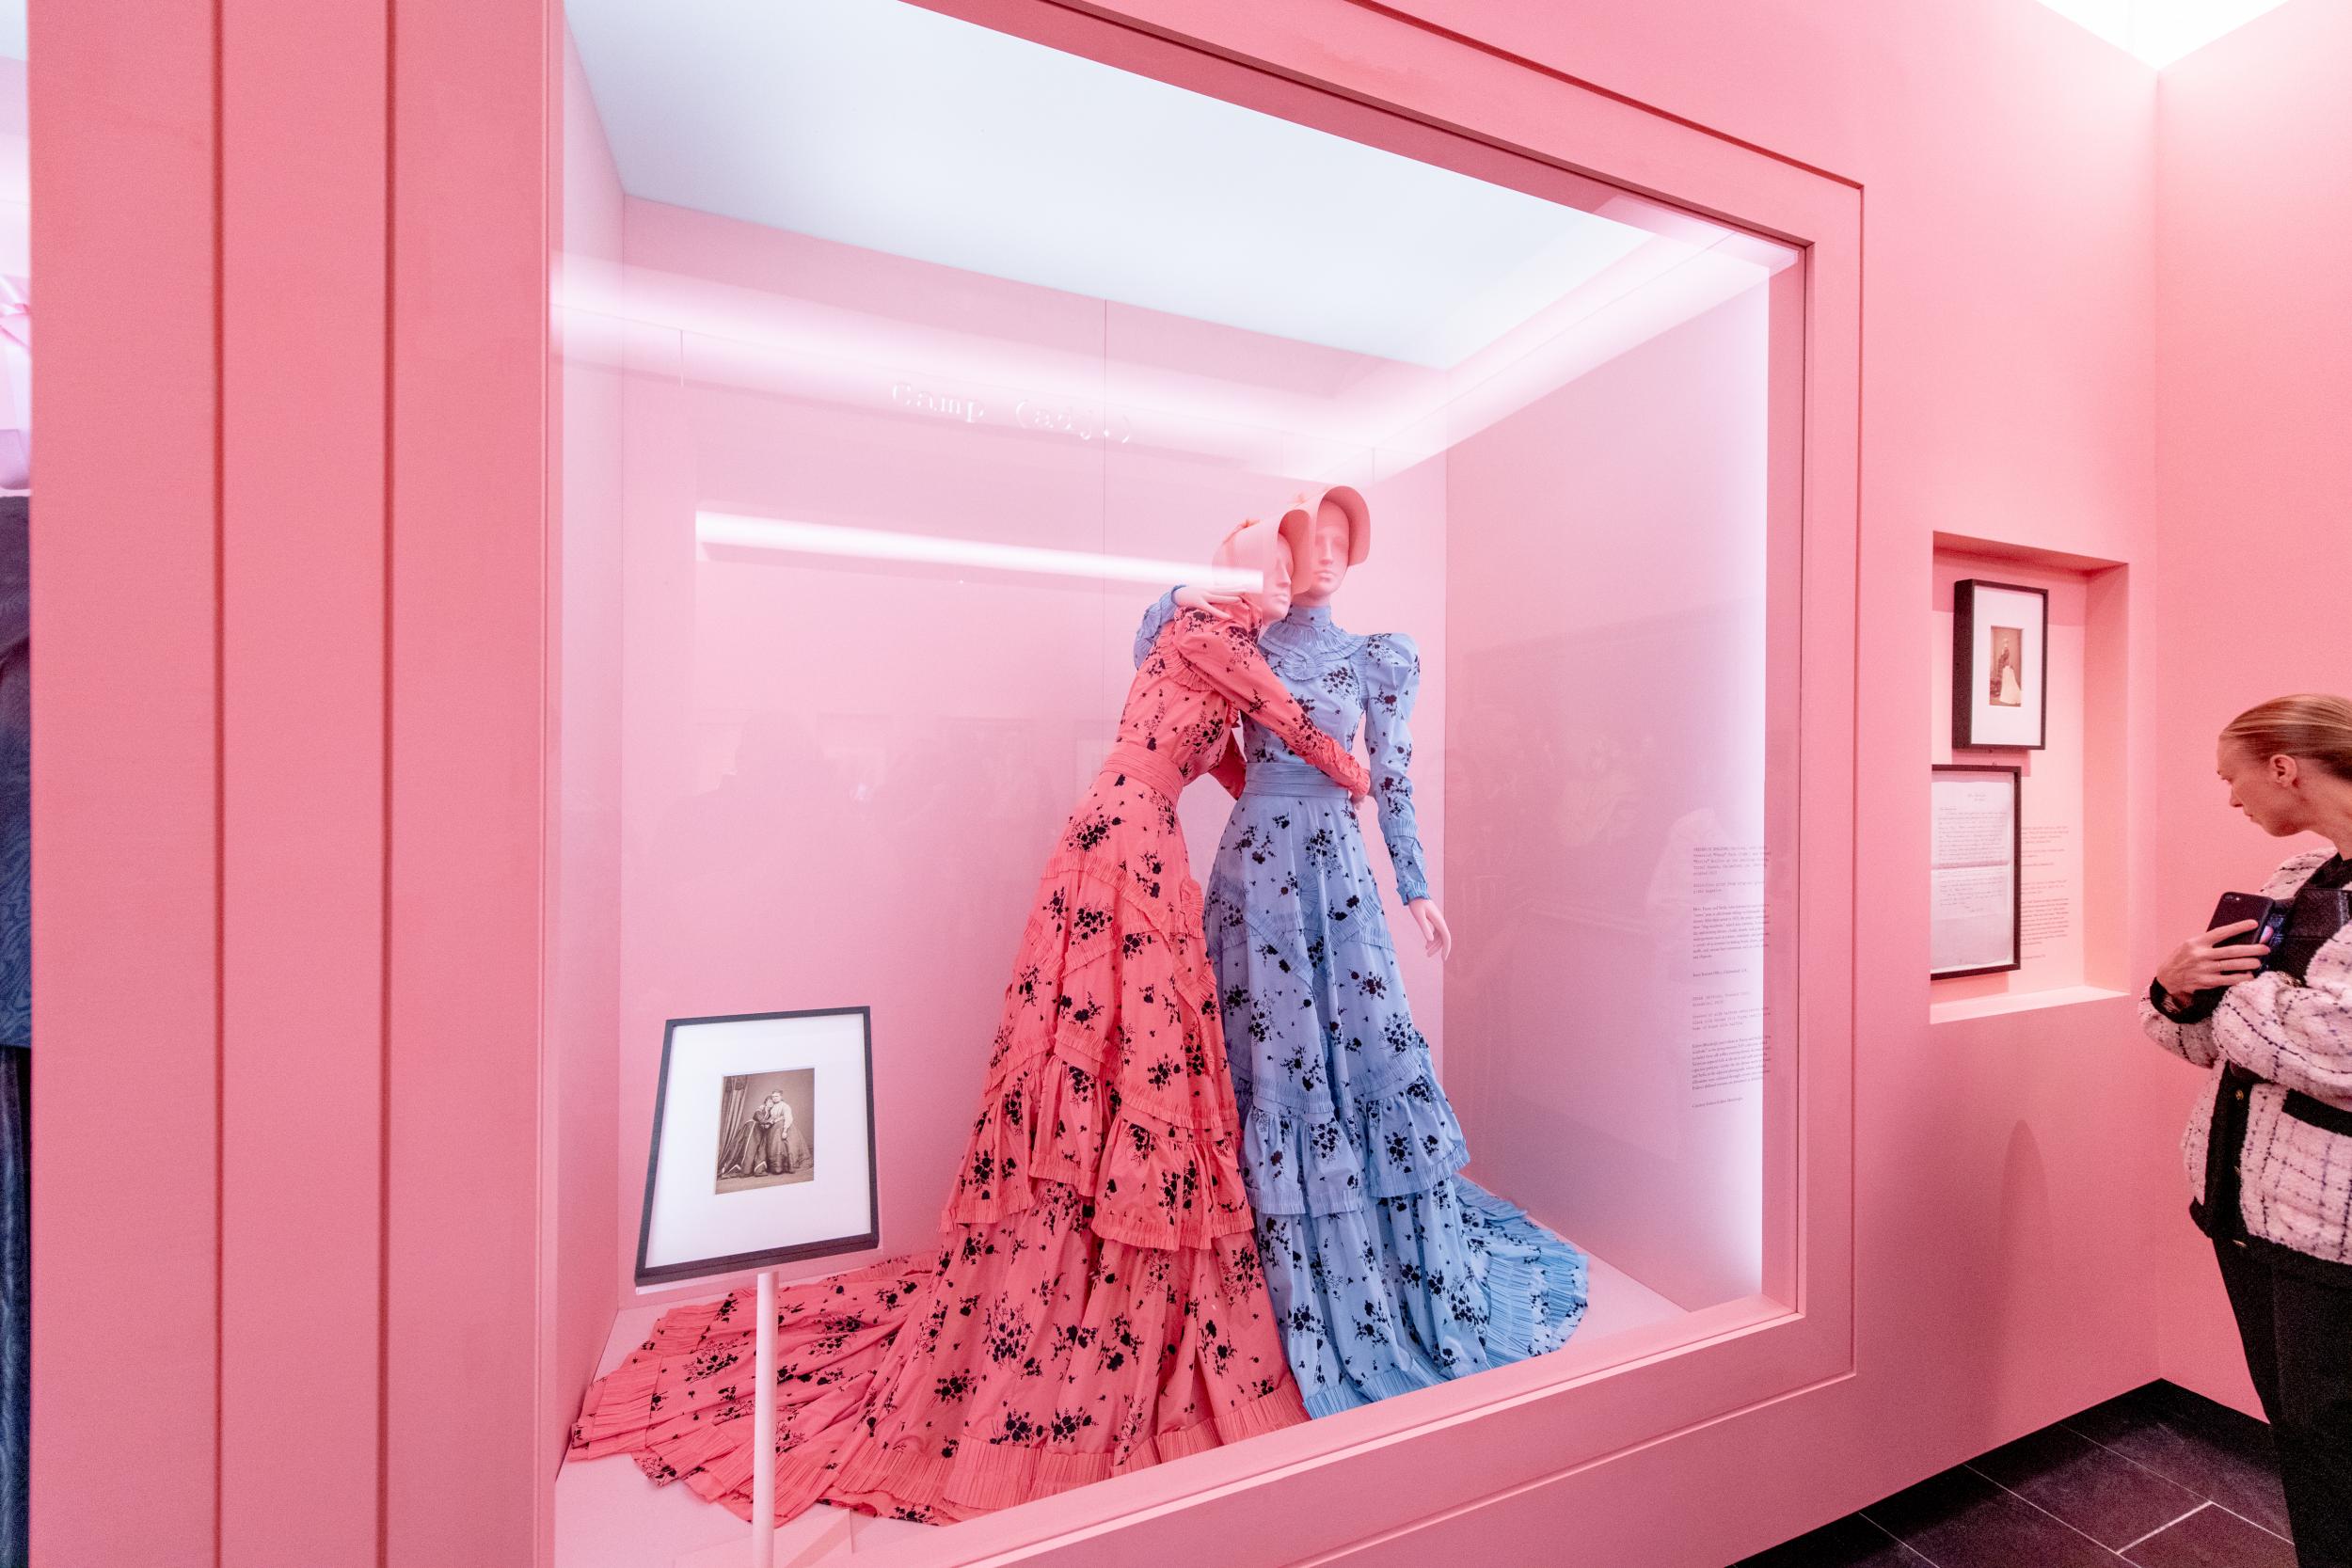 These Erdem silk taffeta evening dresses pay tribute to Fanny and Stella, two Victorian cross-dressers whose “drag wardrobe” was confiscated by the police in 1870. (Photo by Roy Rochlin/Getty Images)